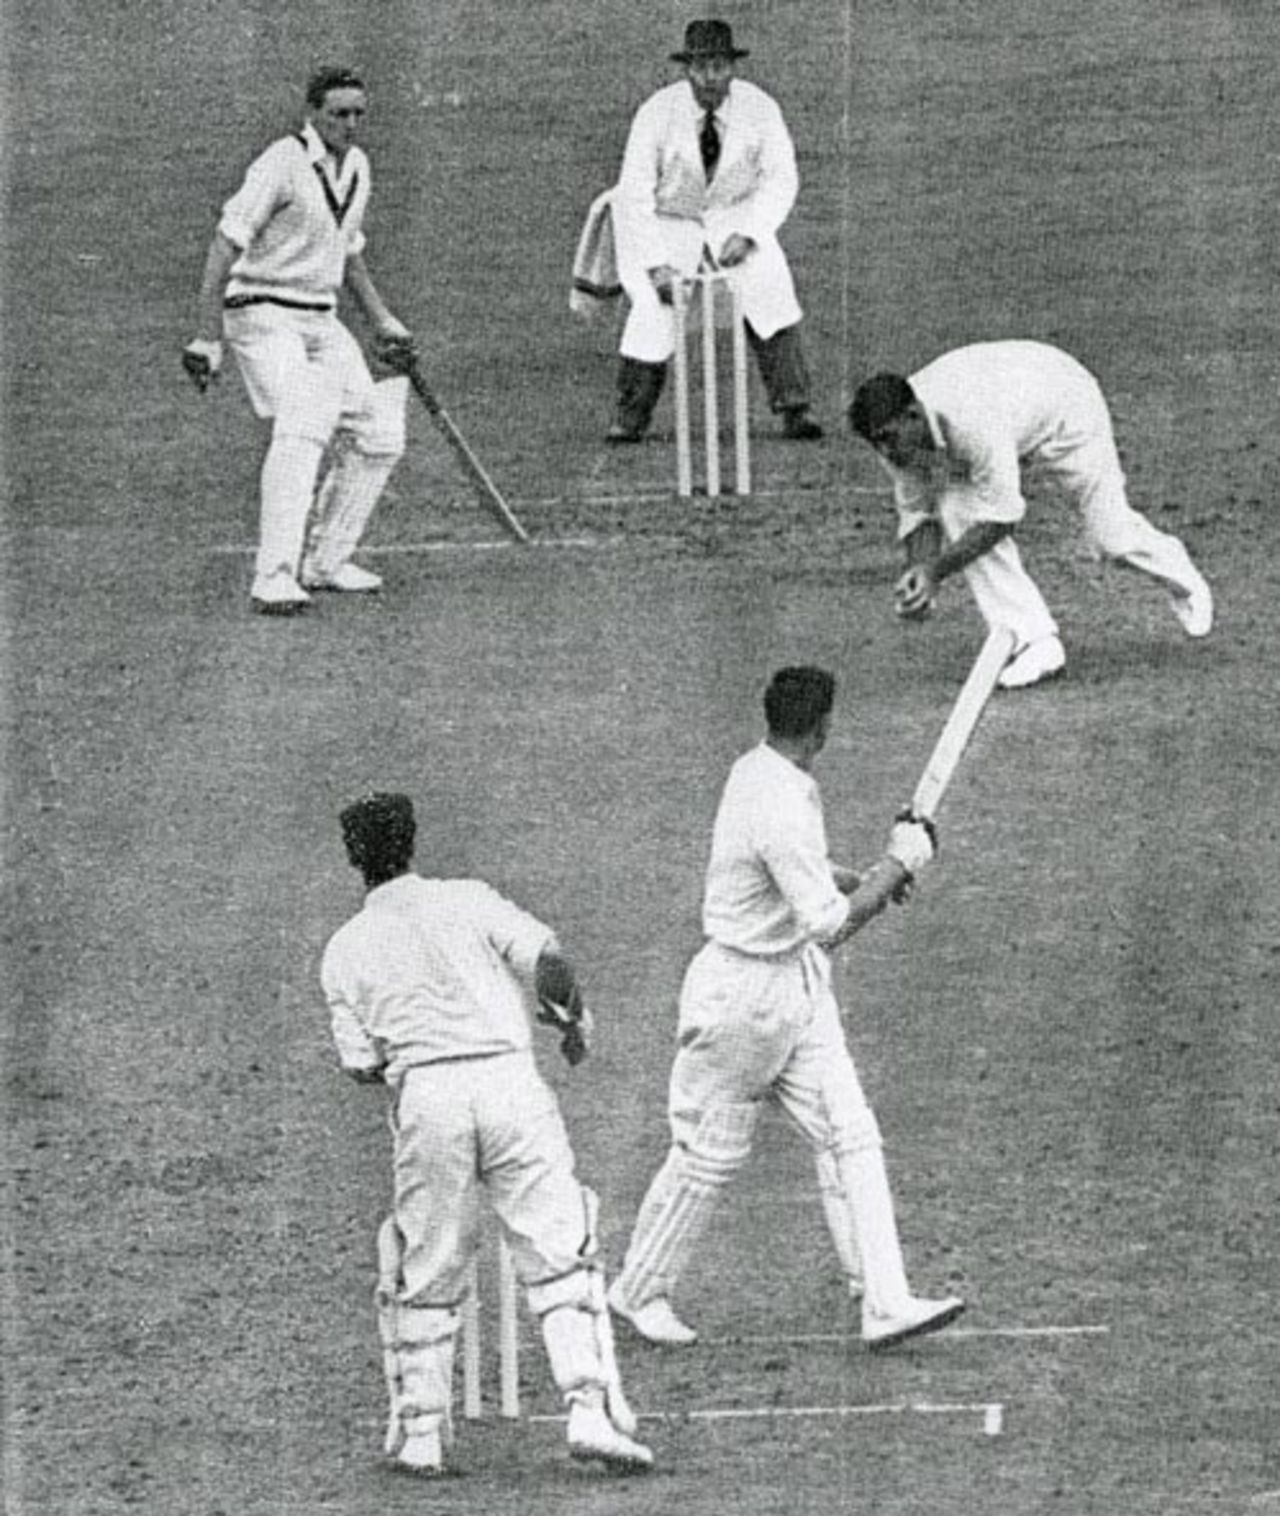 Alec Bedser dismisses Ron Archer and takes his 39th wicket of the 1953 Ashes series, England v Australia, The Oval, August 15, 1953